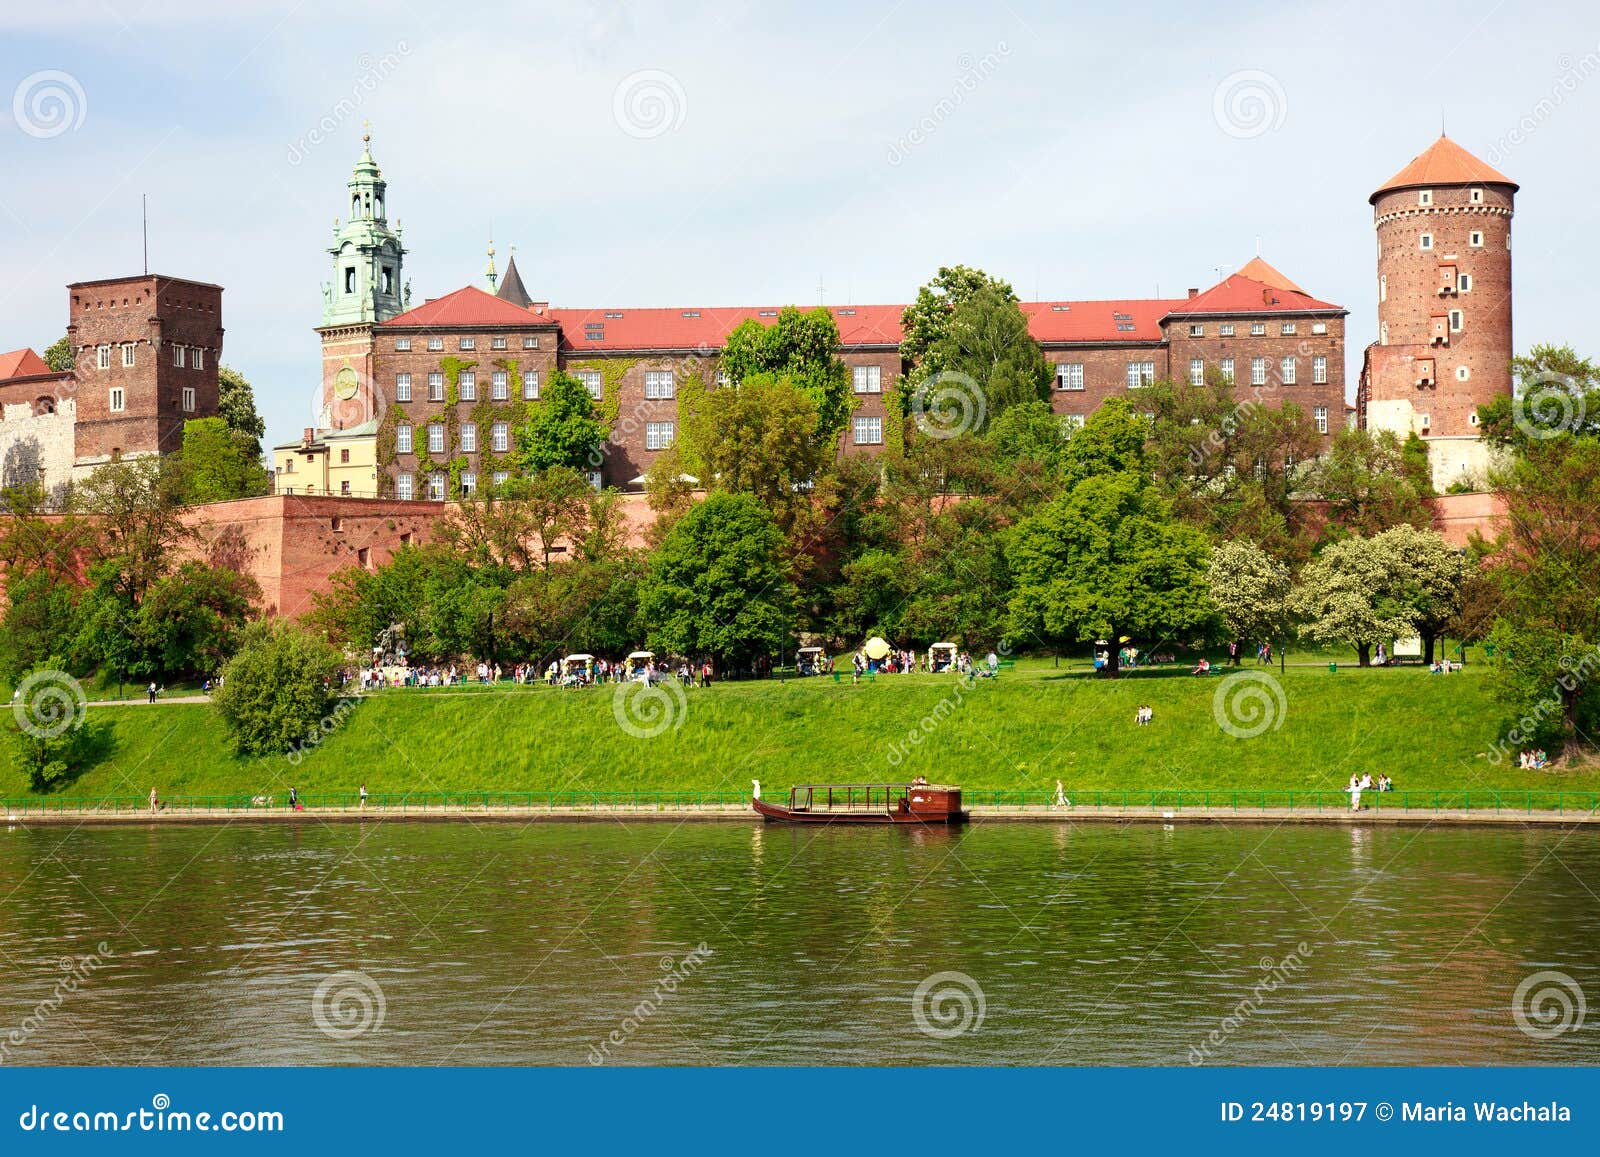 wawel - royal castle in cracow, poland